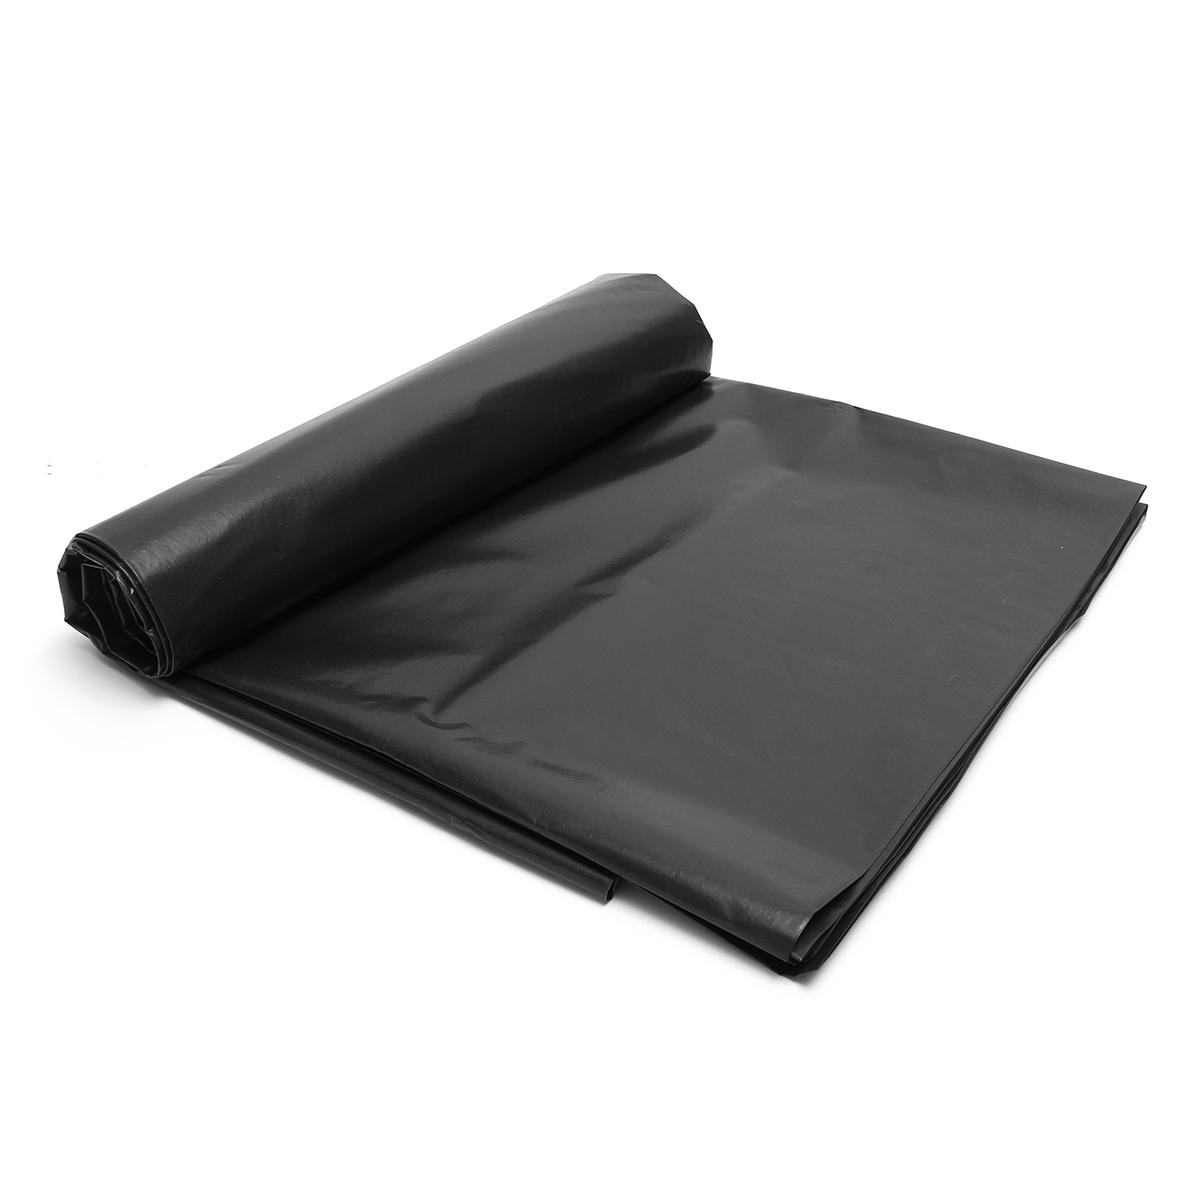 Image of Impermeable Membrane Fish Pond Liners Reinforced HDPE Durable for Garden Pools Landscaping